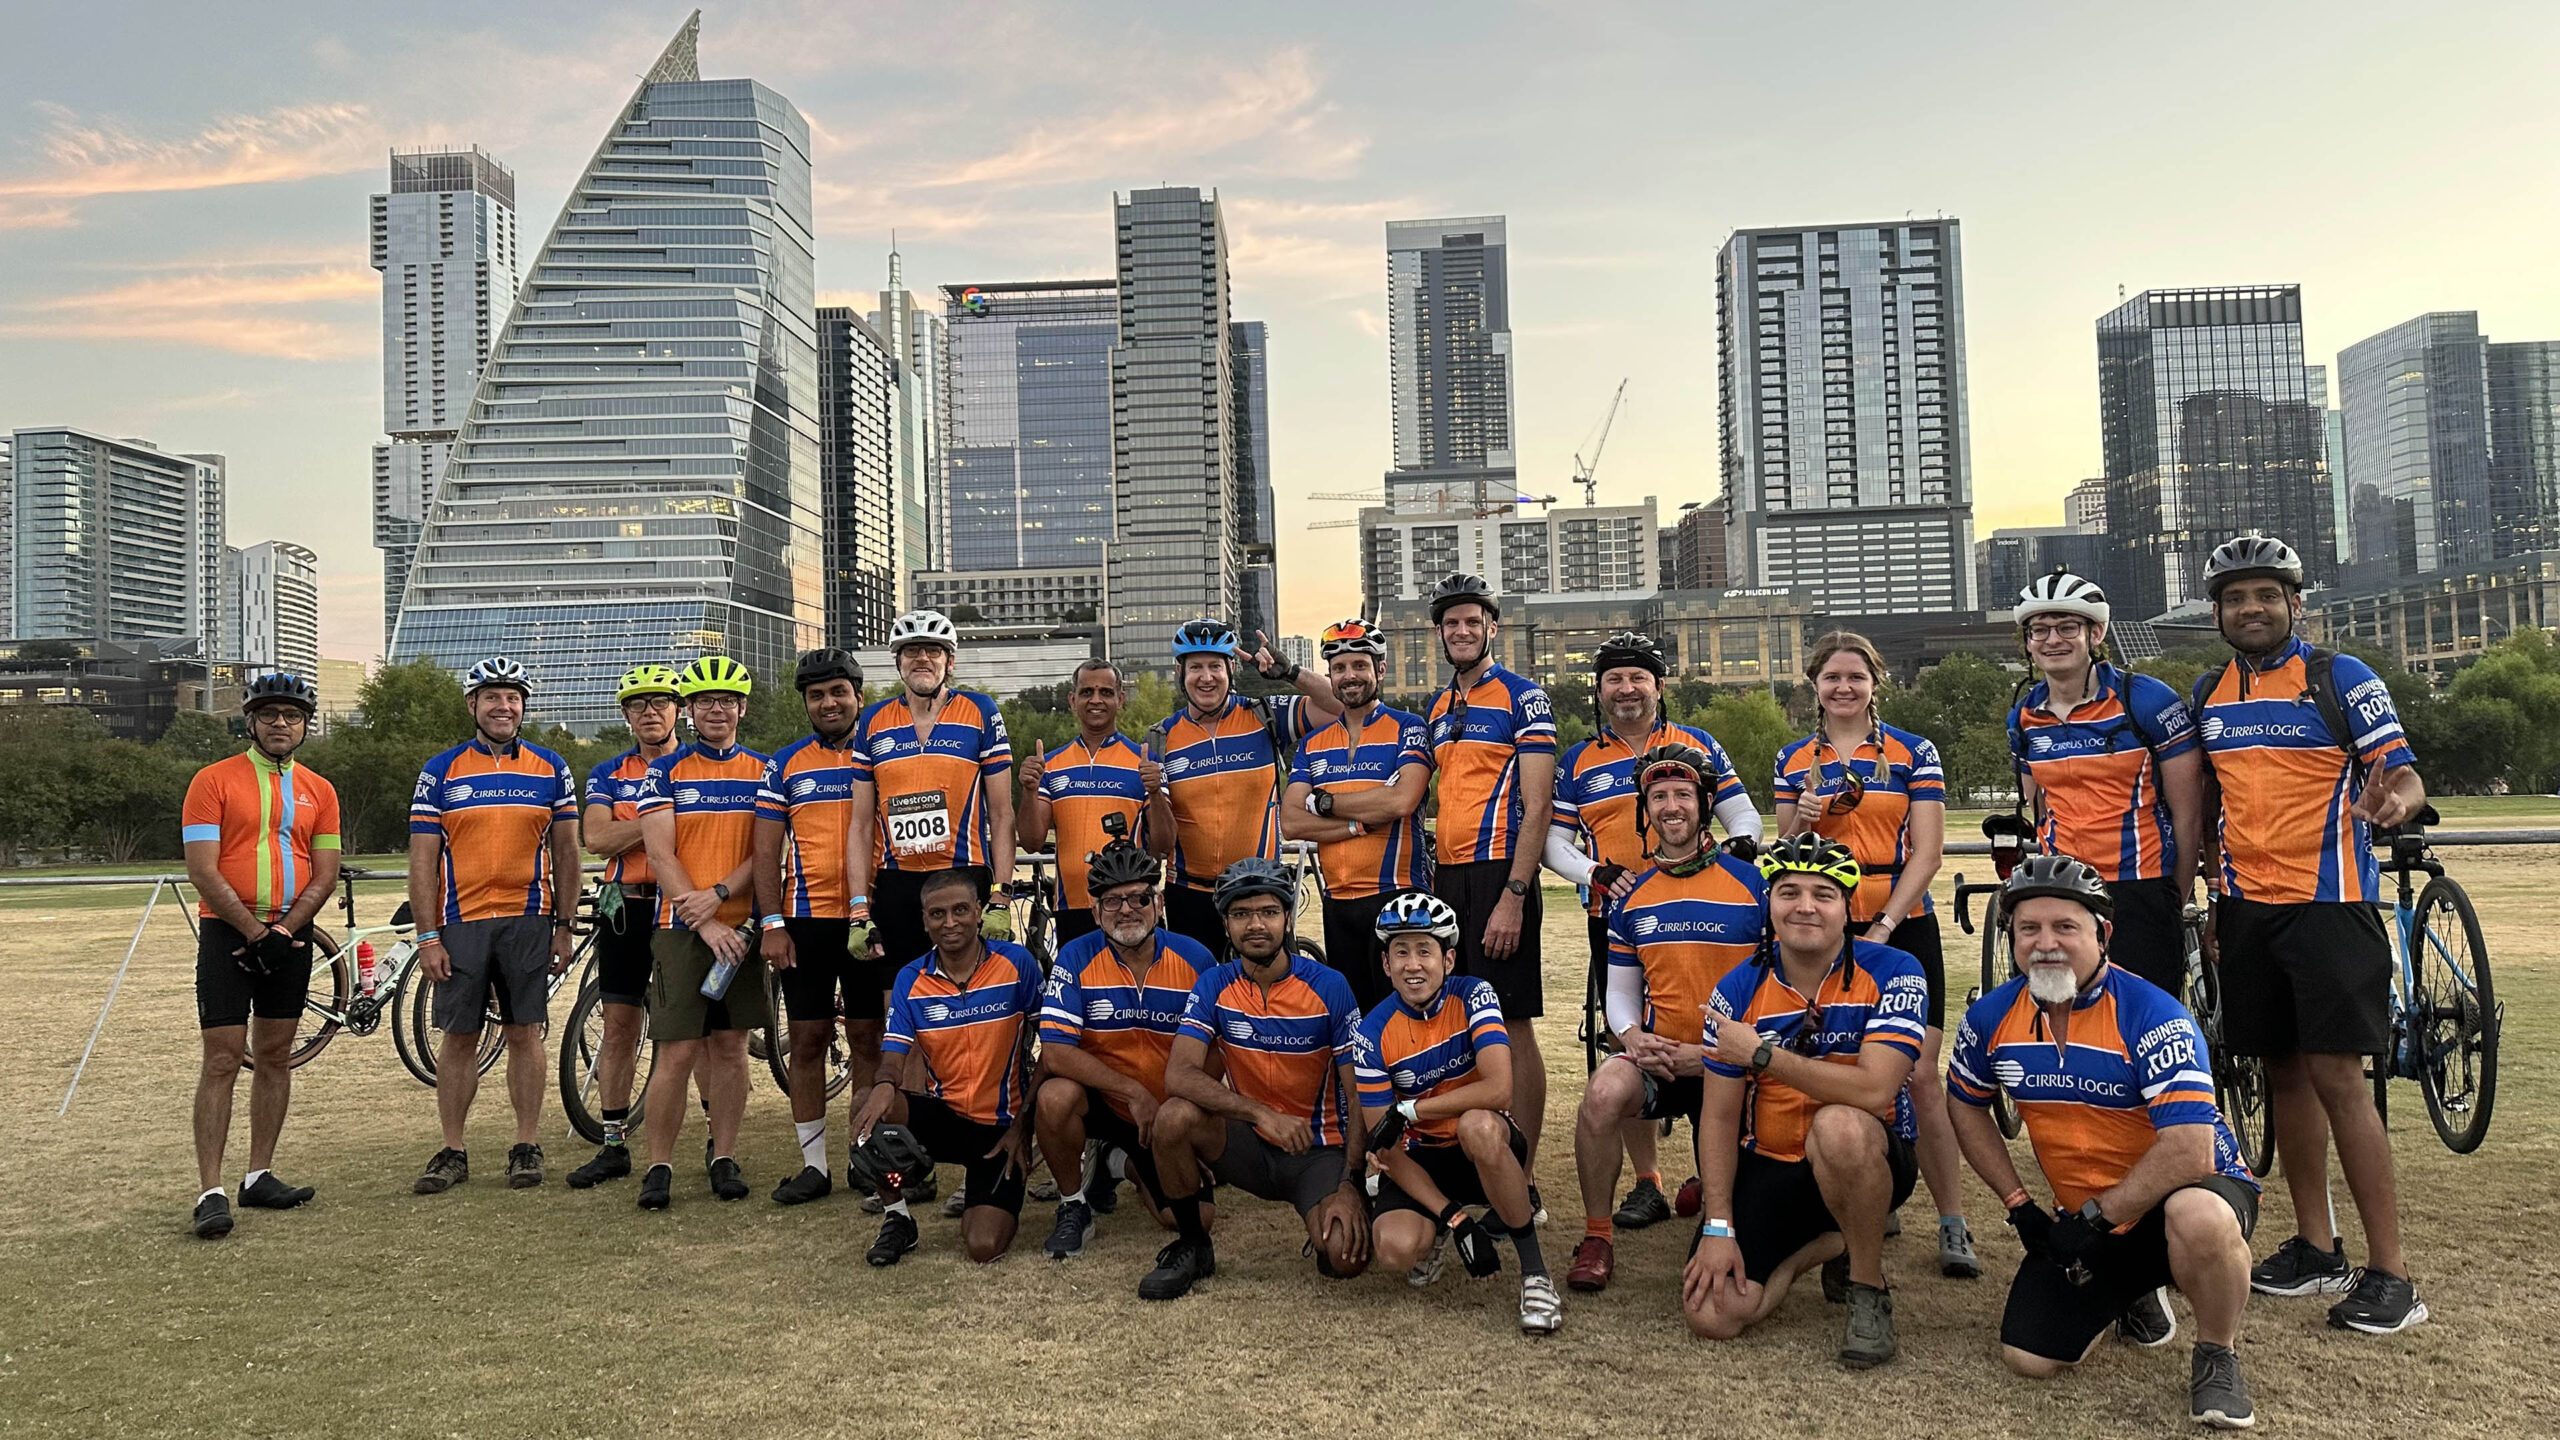 Group of cyclists wearing orange jerseys posing in front of city skyline